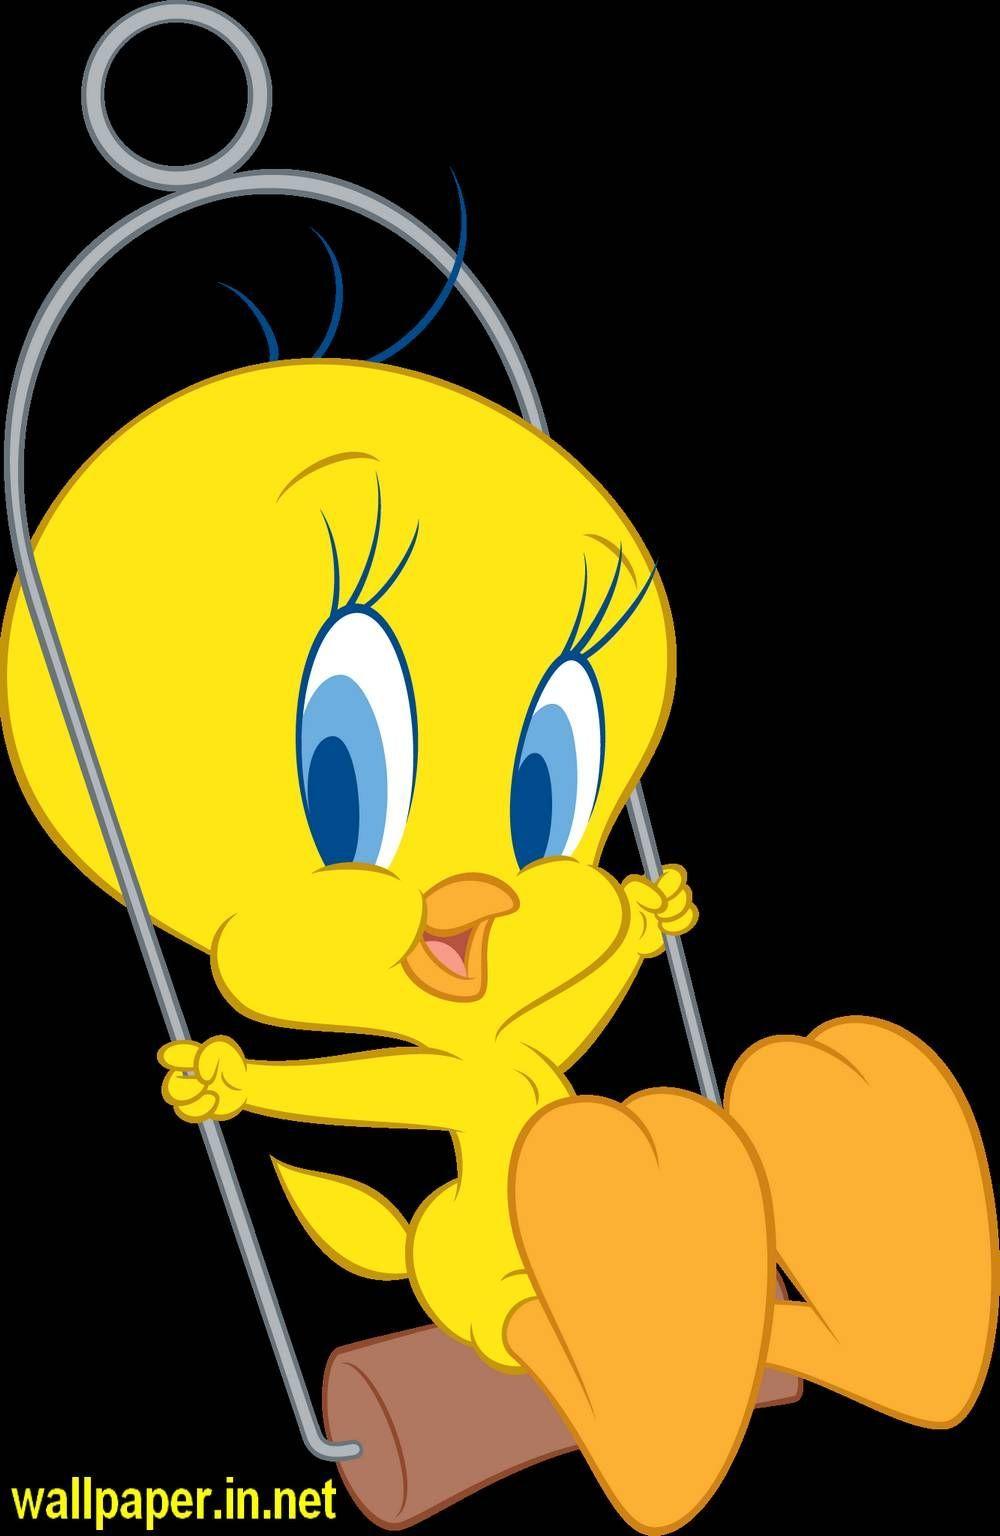 Featured image of post Iphone Tweety Wallpaper Hd Download share and comment wallpapers you like